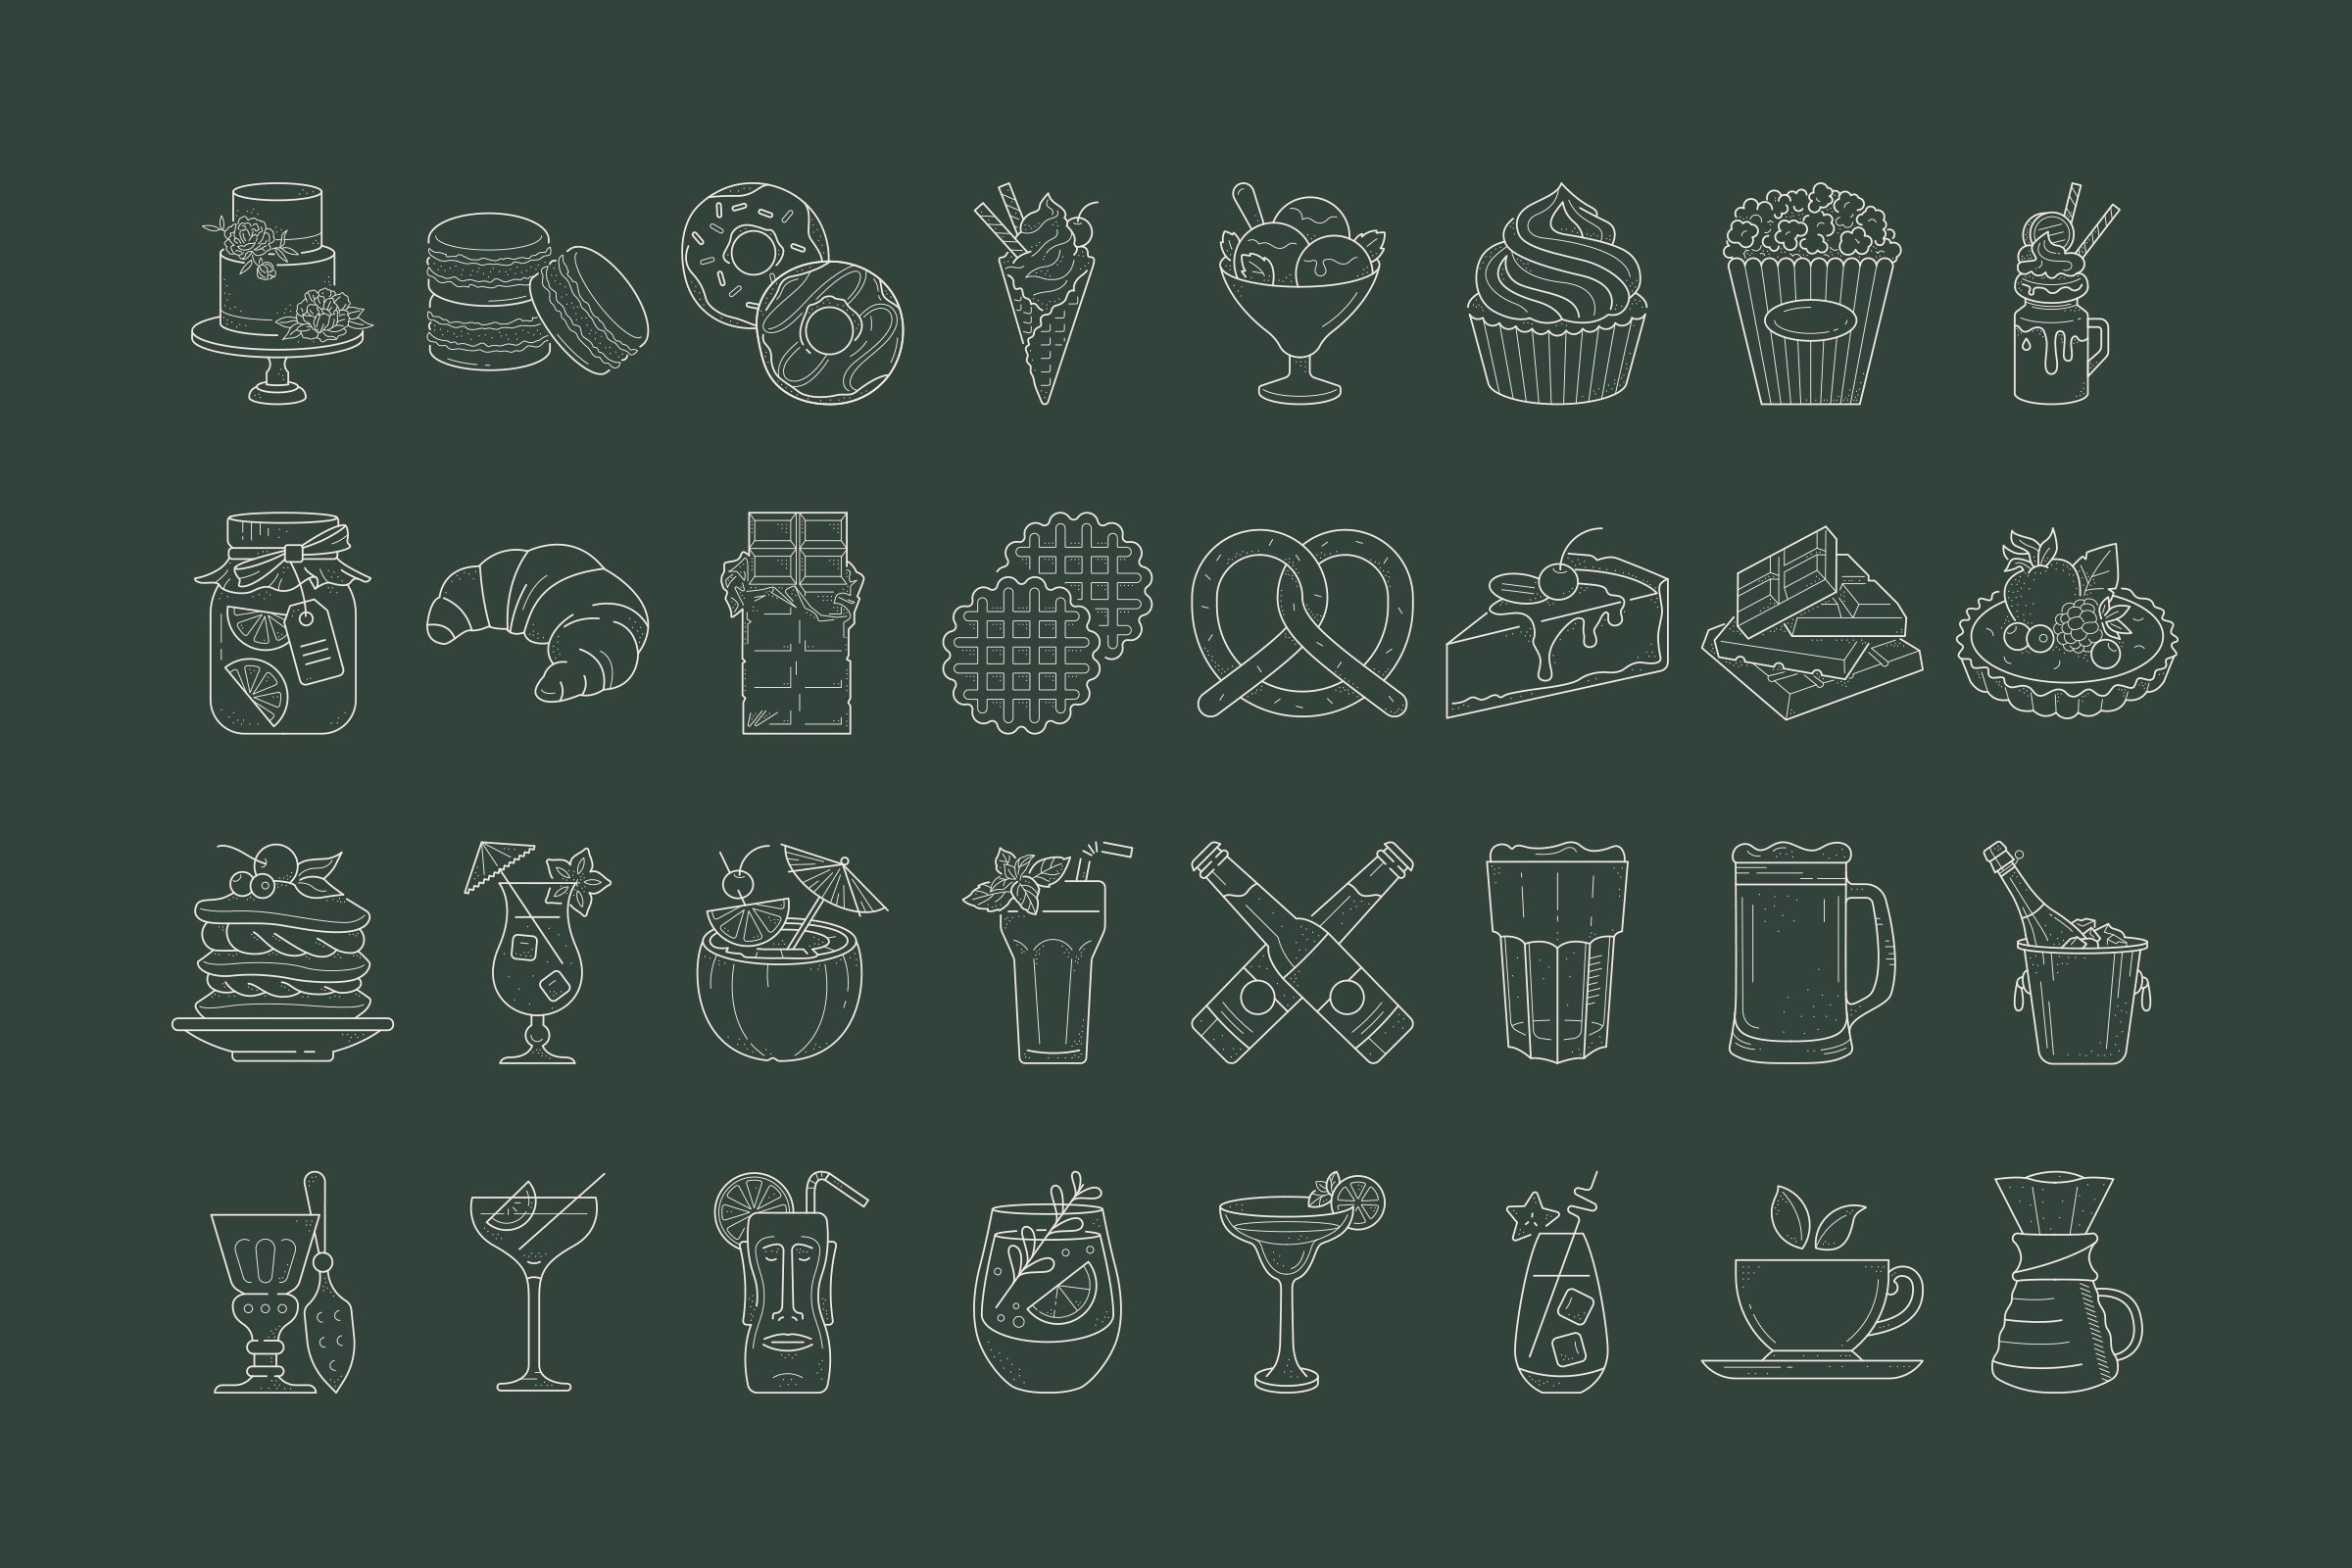 Live stroke & outlined stroke icons available to suit your design from 0.3 pt upwards.